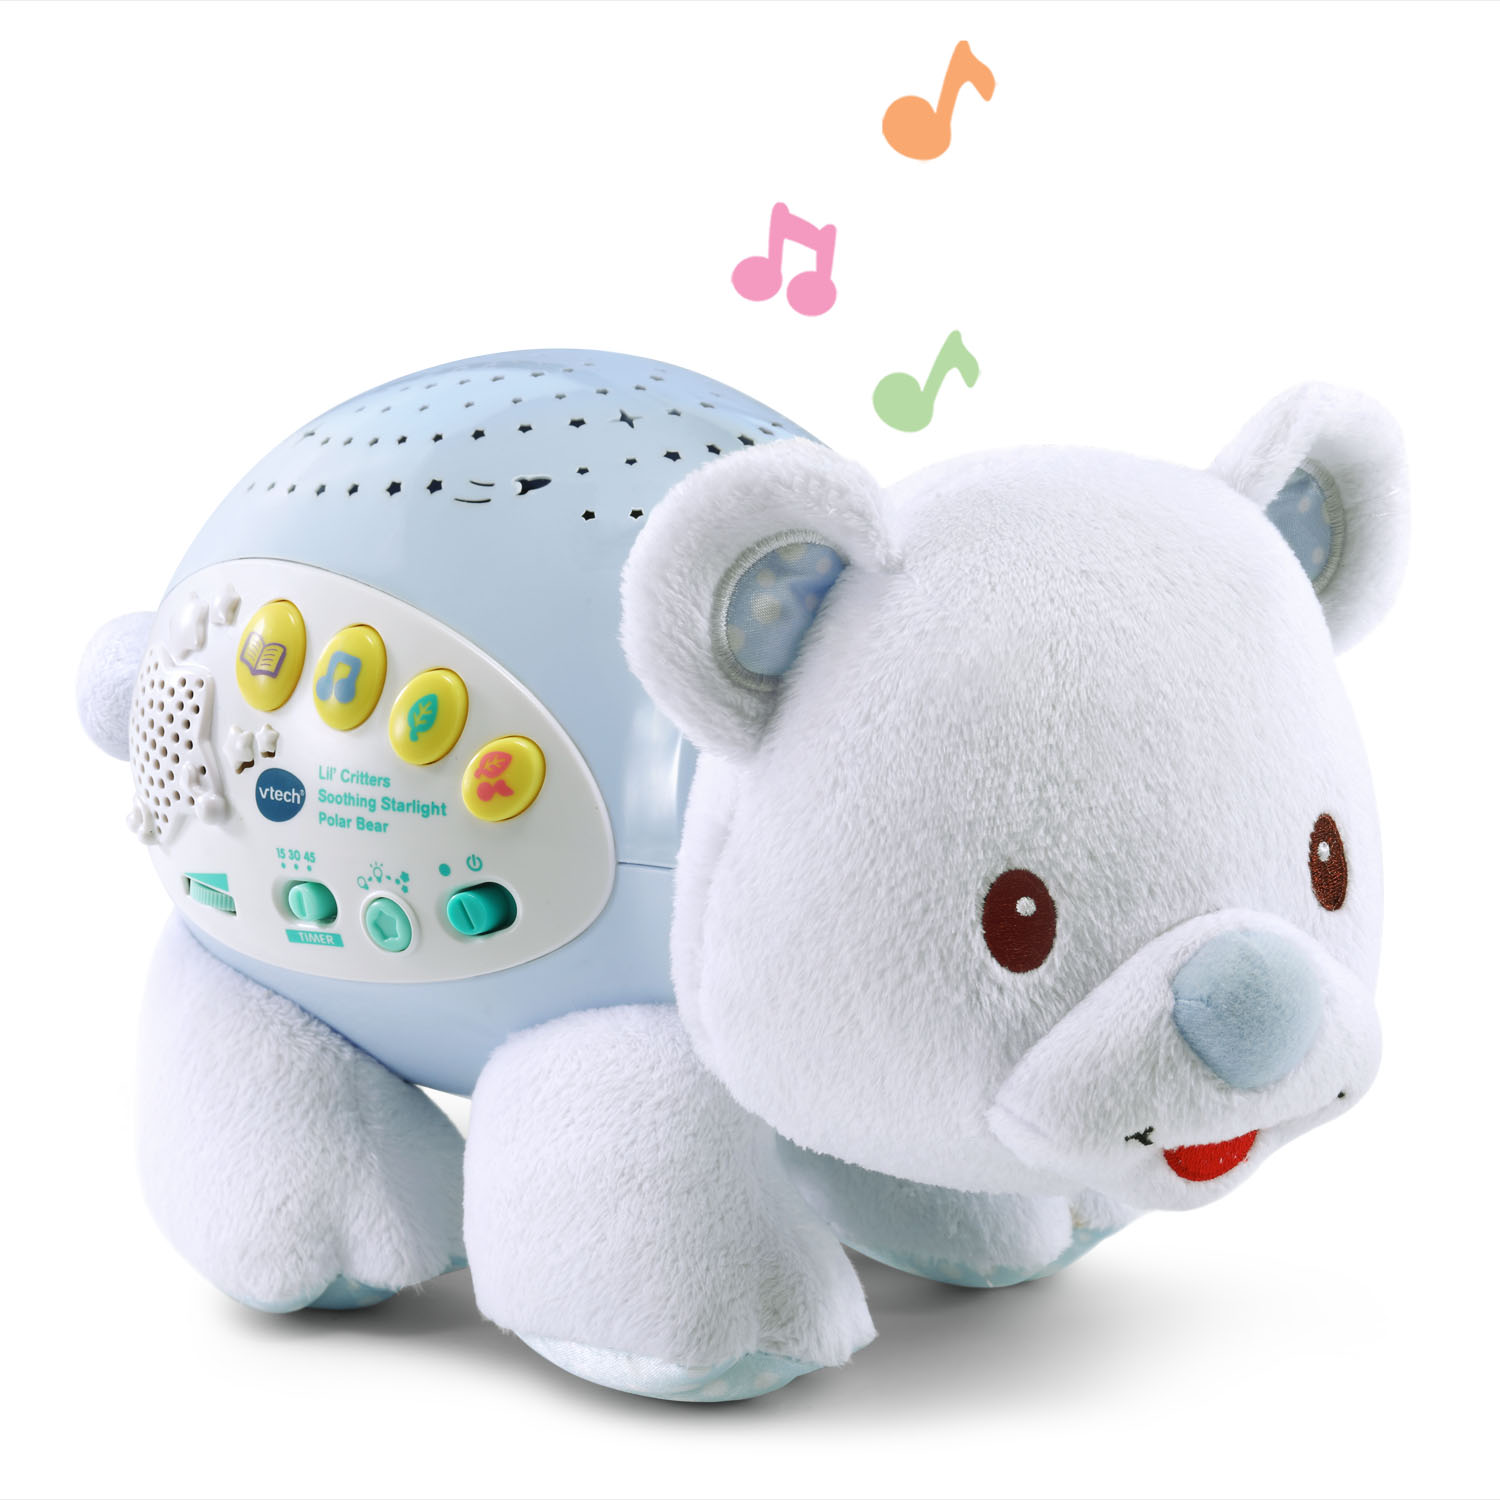 Lil’ Critters Soothing Starlight Polar Bear™